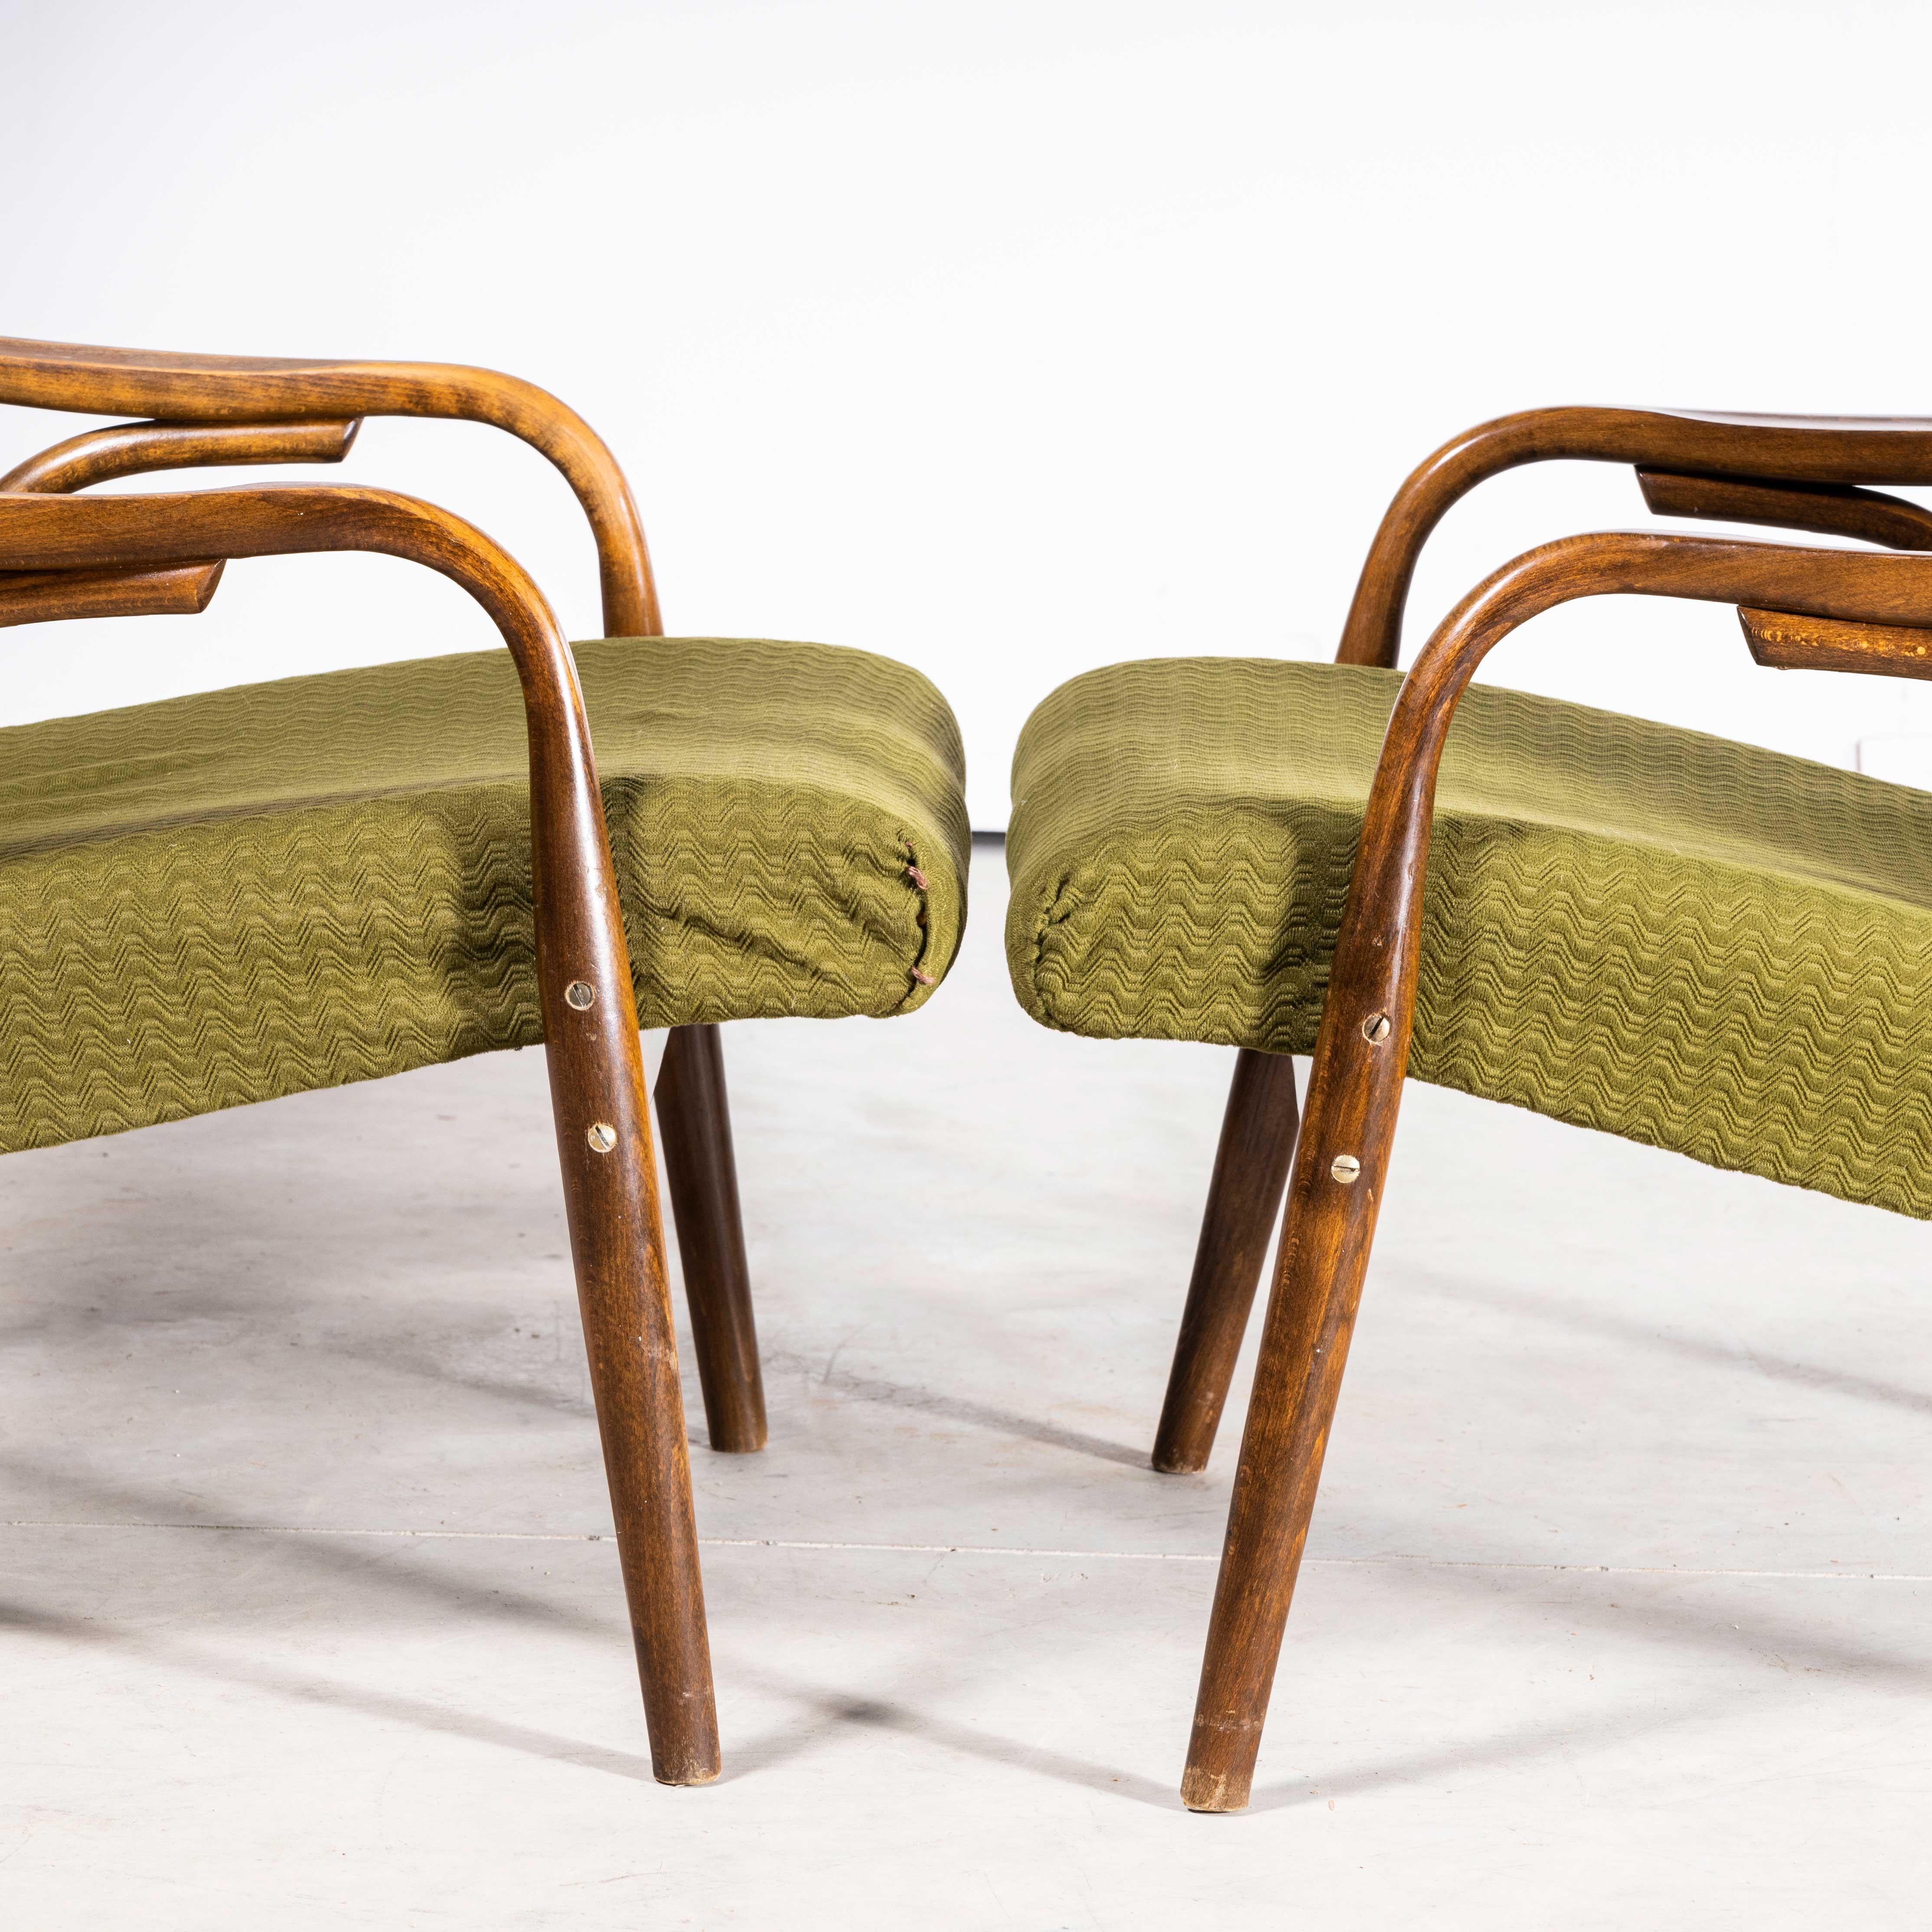 1950s Czech midcentury Original Armchairs – Pair In Olive Green
1950s Czech midcentury Original Armchairs – Pair In Olive Green. Sourced direct in the Czech republic this is one of Tons most elegant designs. We carefully select very original